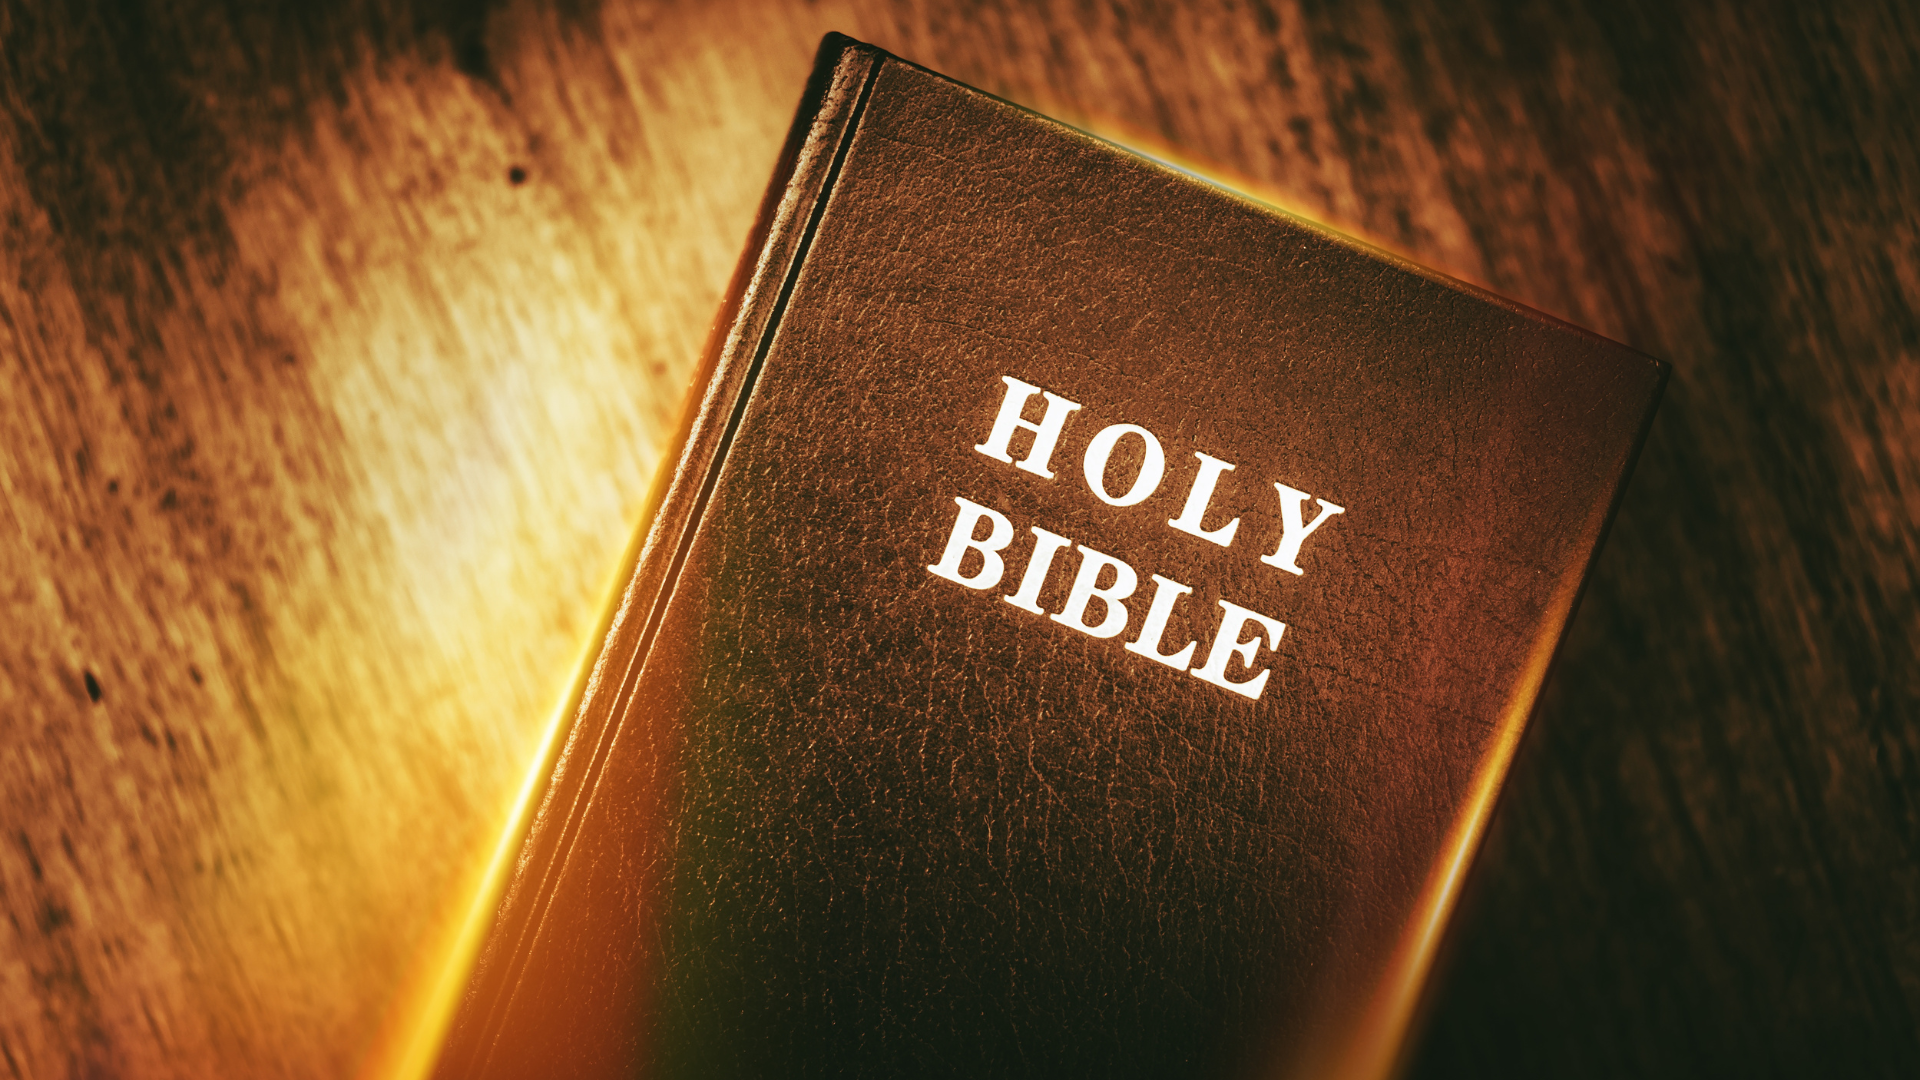 A holy bible is sitting on a wooden table.